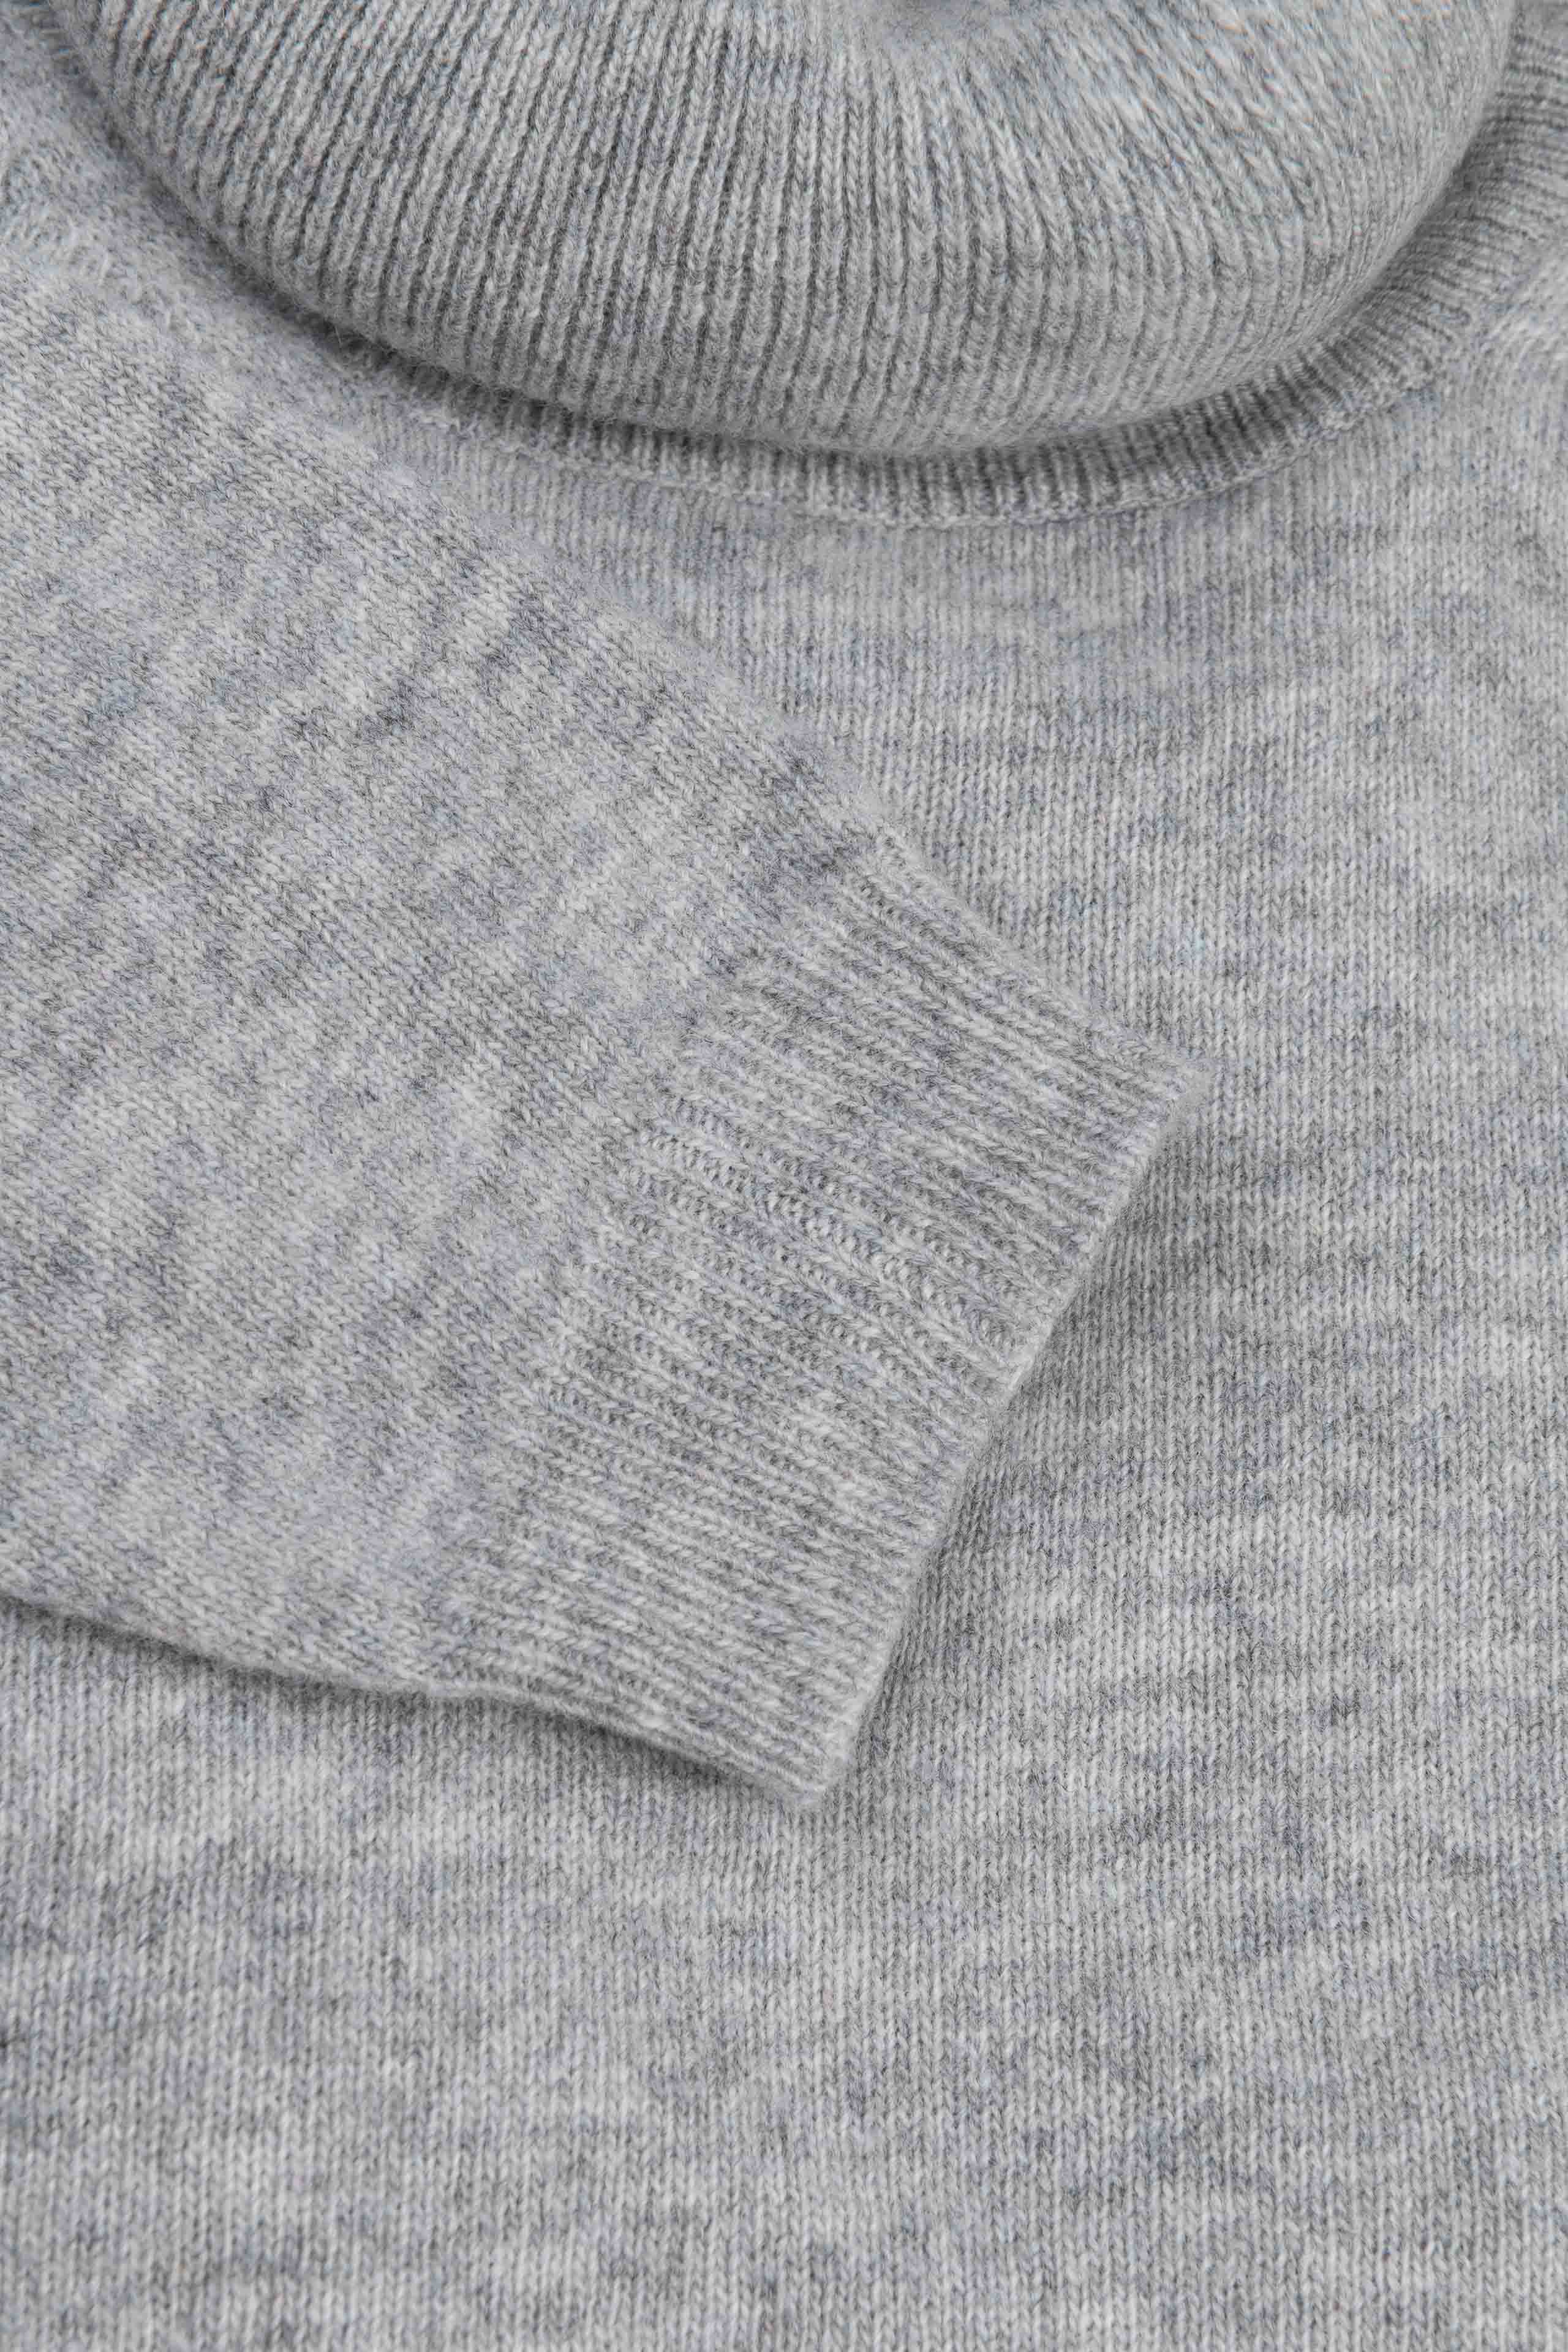 Wool and cashmere turtleneck - Ash grey